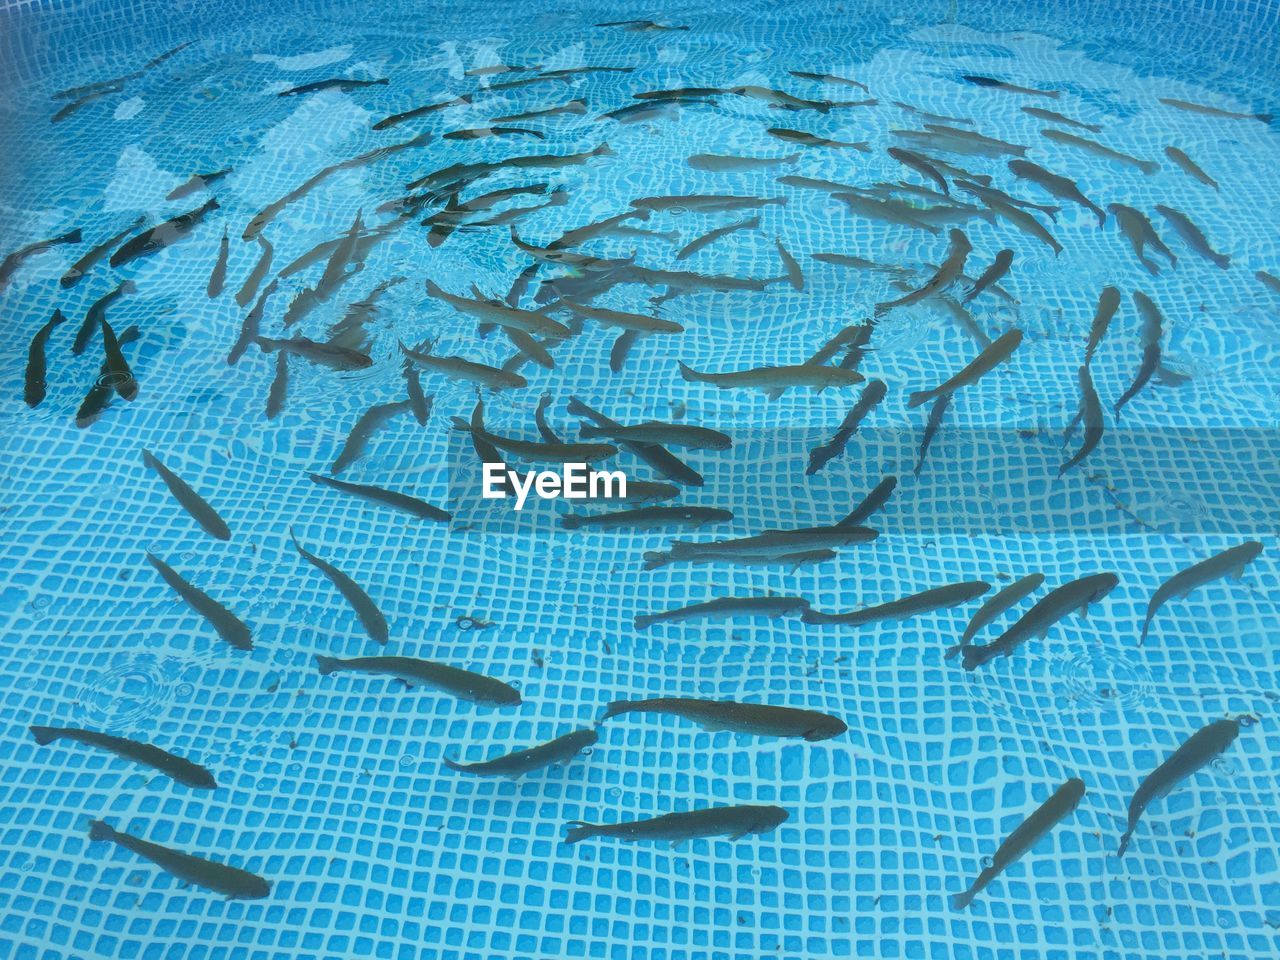 High angle view of fishes in swimming pool